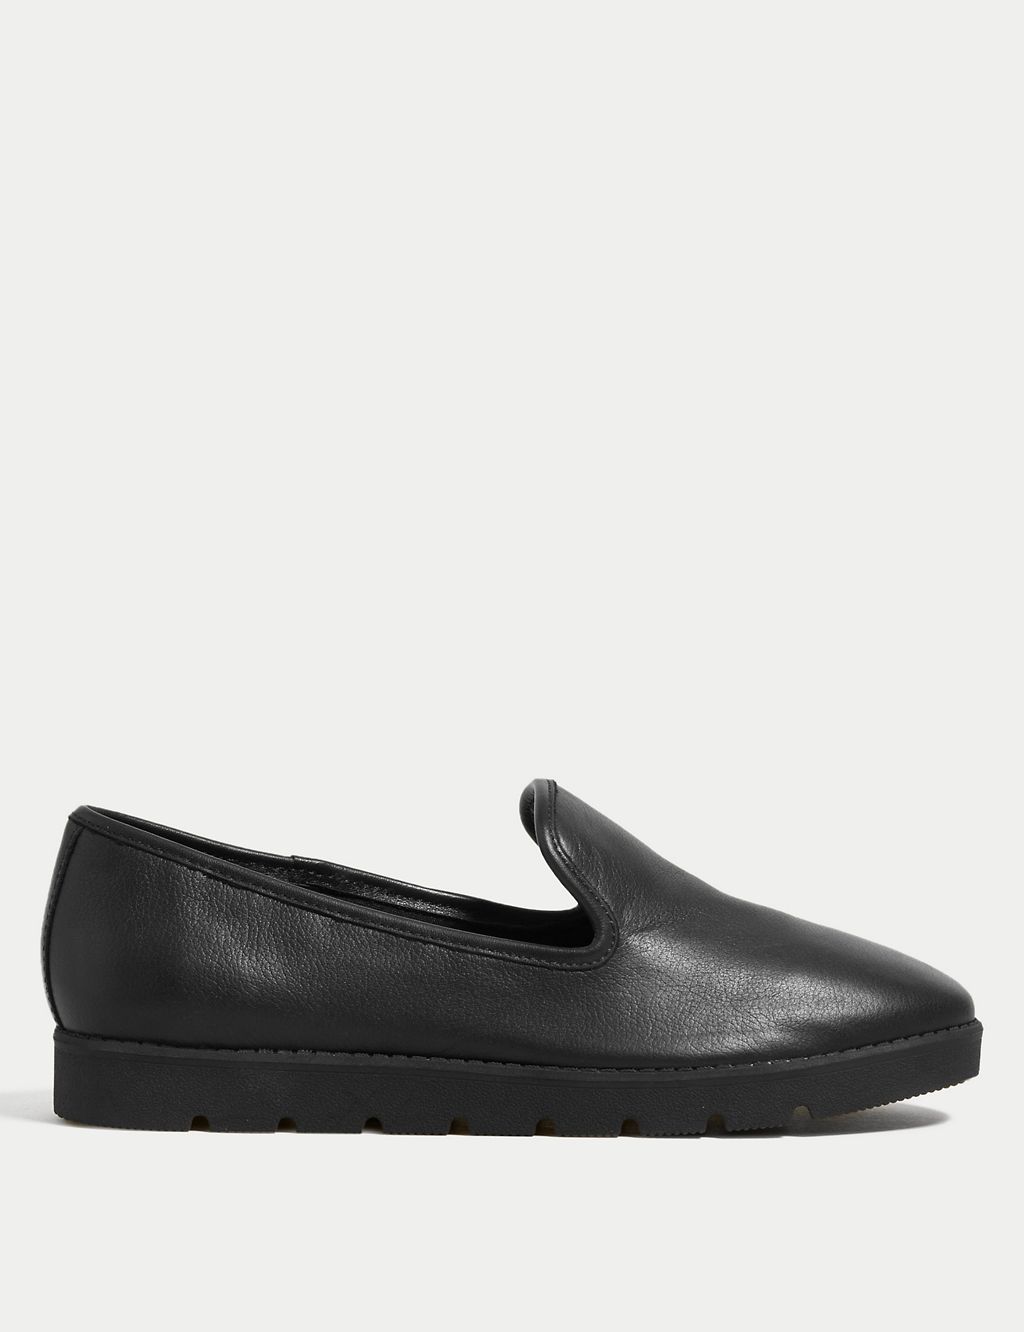 Leather Slip On Flat Pumps | M&S Collection | M&S